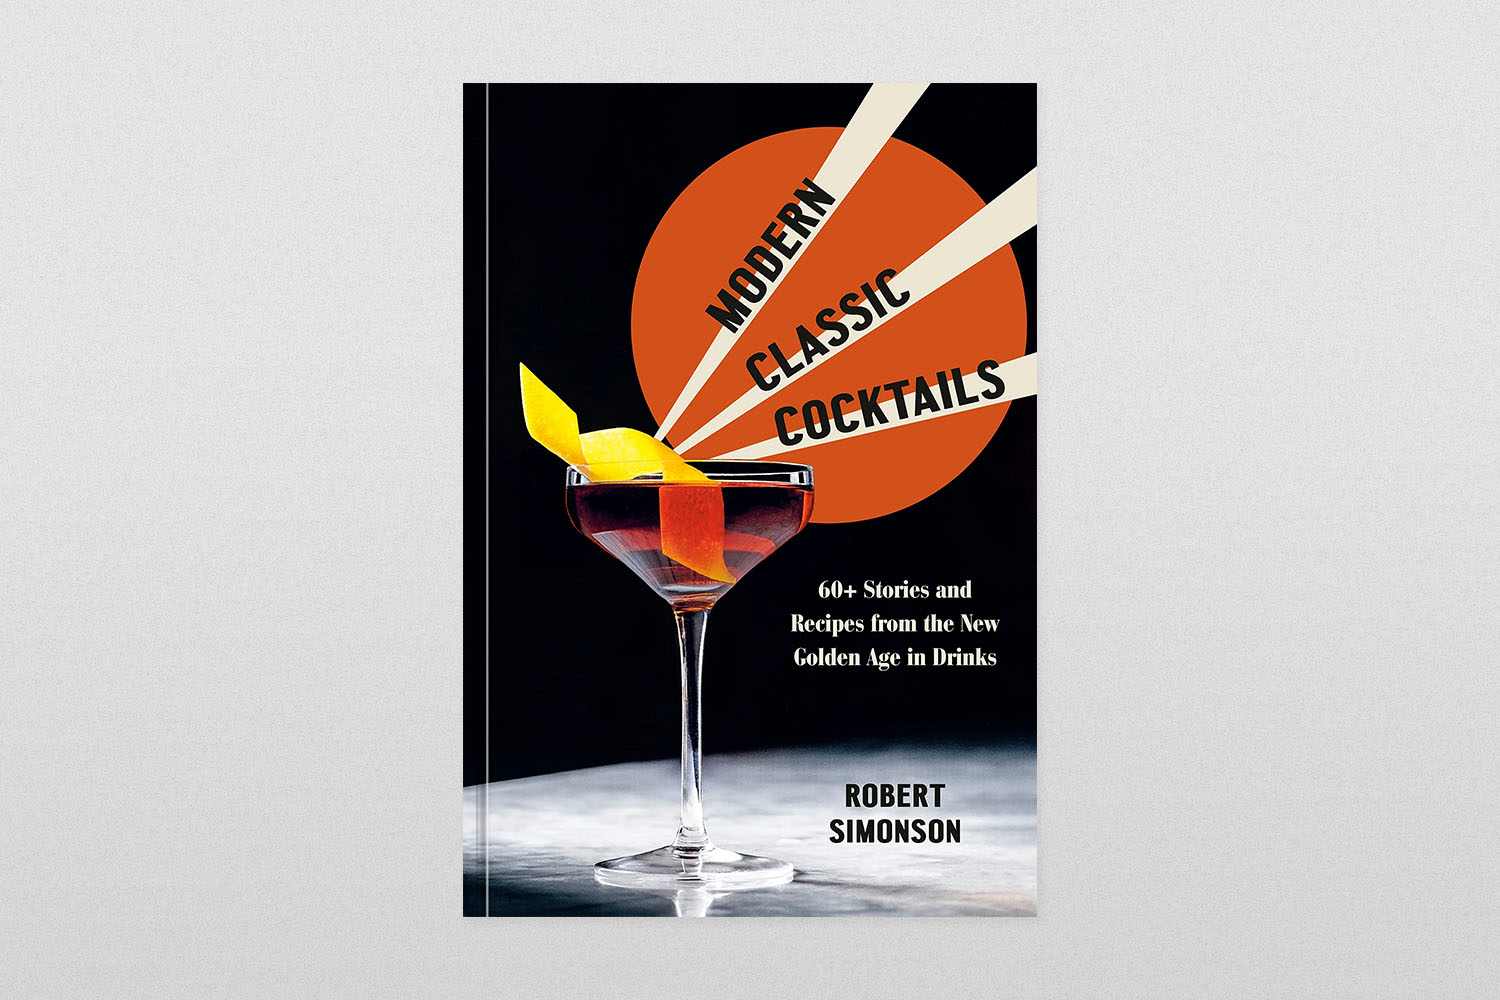 Modern Classic Cocktails- 60+ Stories and Recipes from the New Golden Age in Drinks